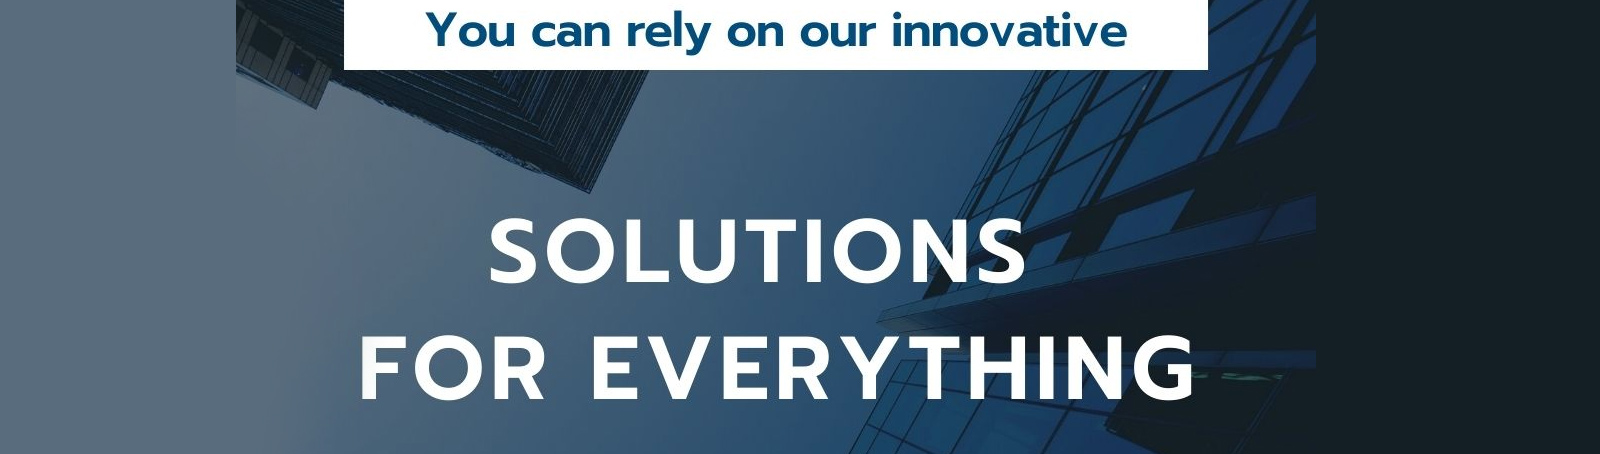 You can rely on our innovative solutions for everything from company registration to starting